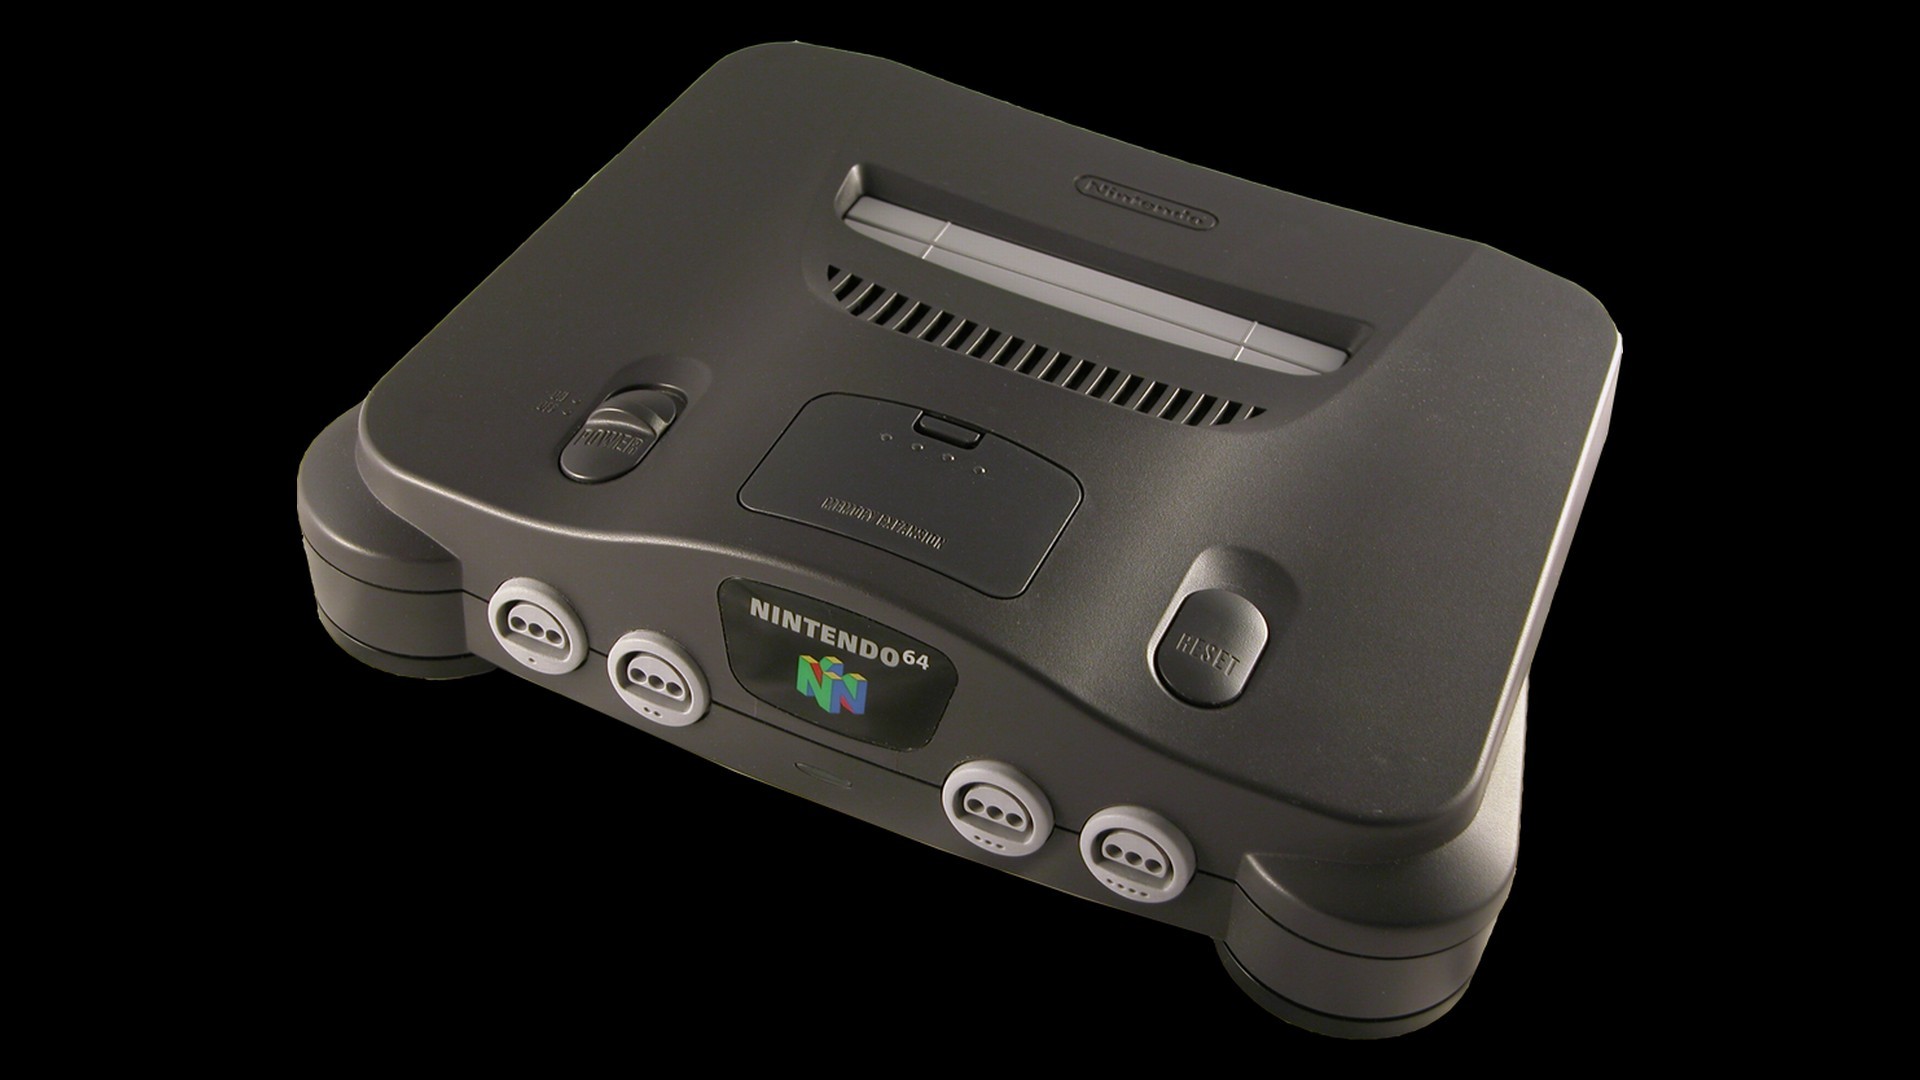 1920x1080 Nintendo 64 System – Video Game Console